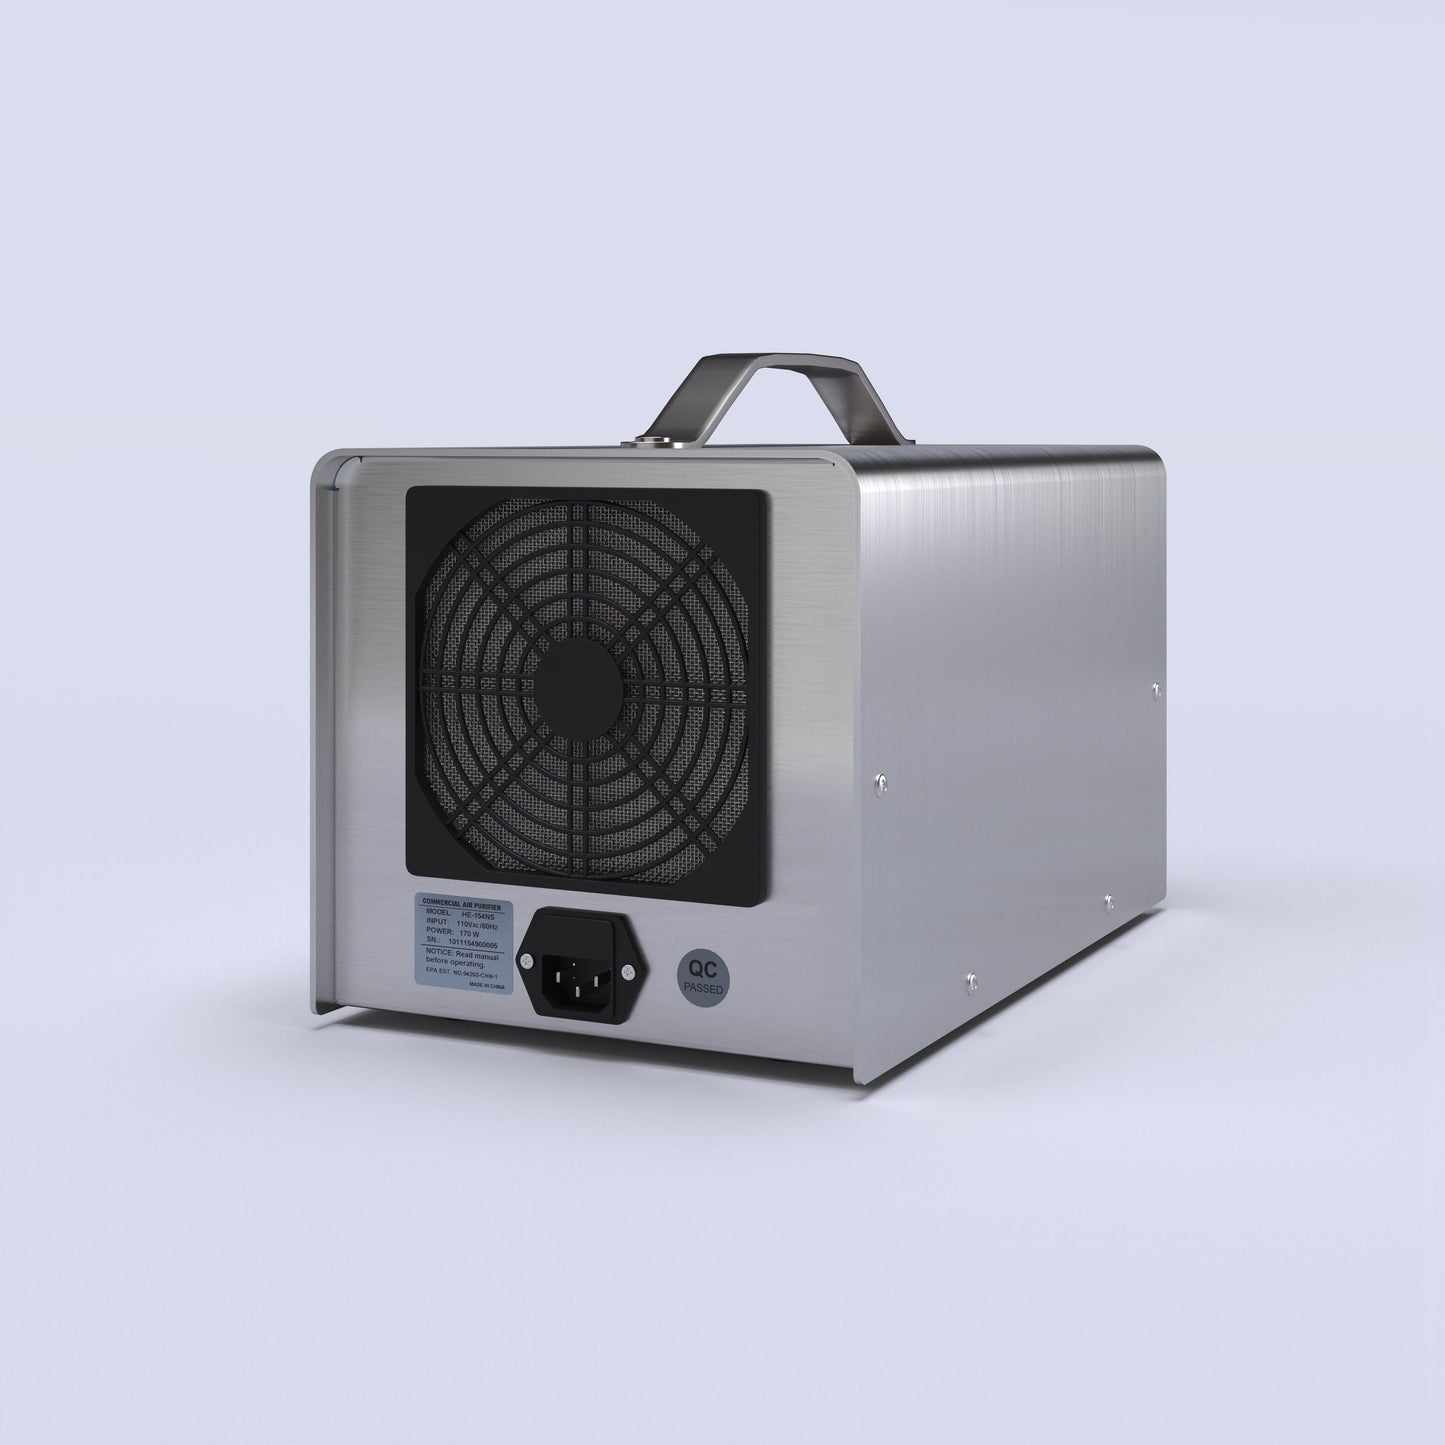 New Comfort Stainless Steel 9,000 to 14,000 mg/hr Commercial Ozone Generator and Air Purifier